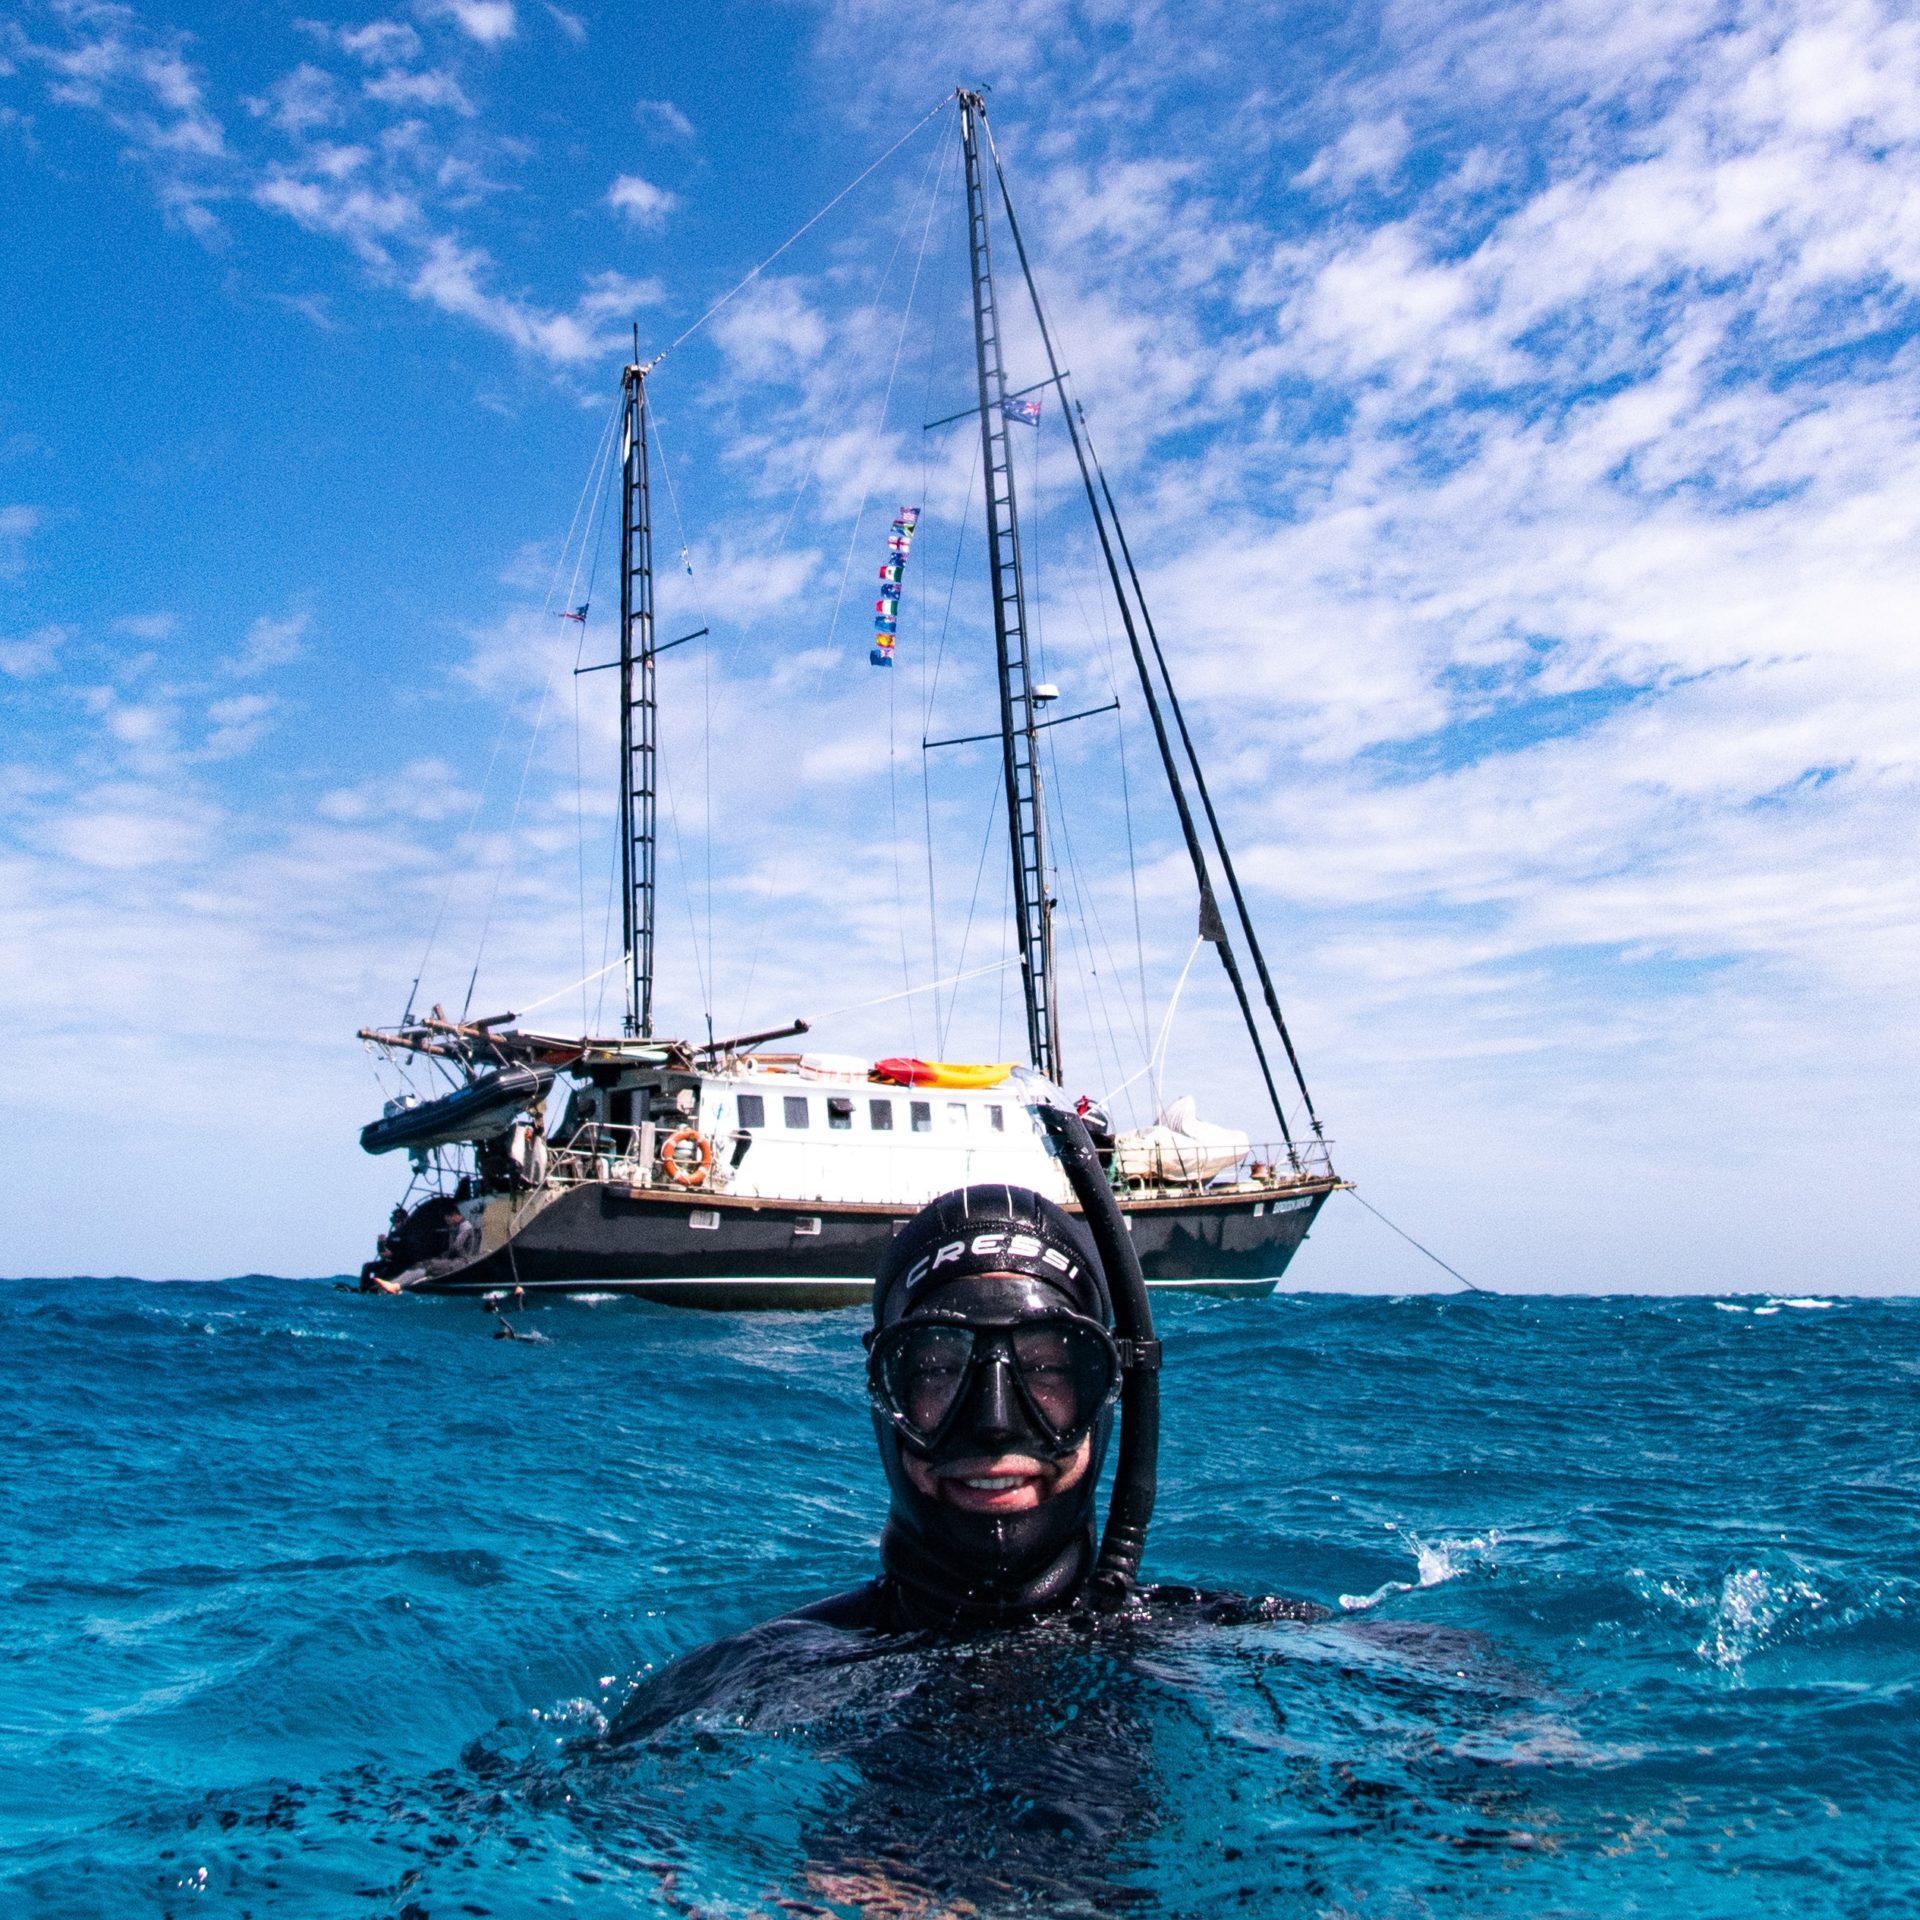 Man snorkeling in Front of a Sailboat